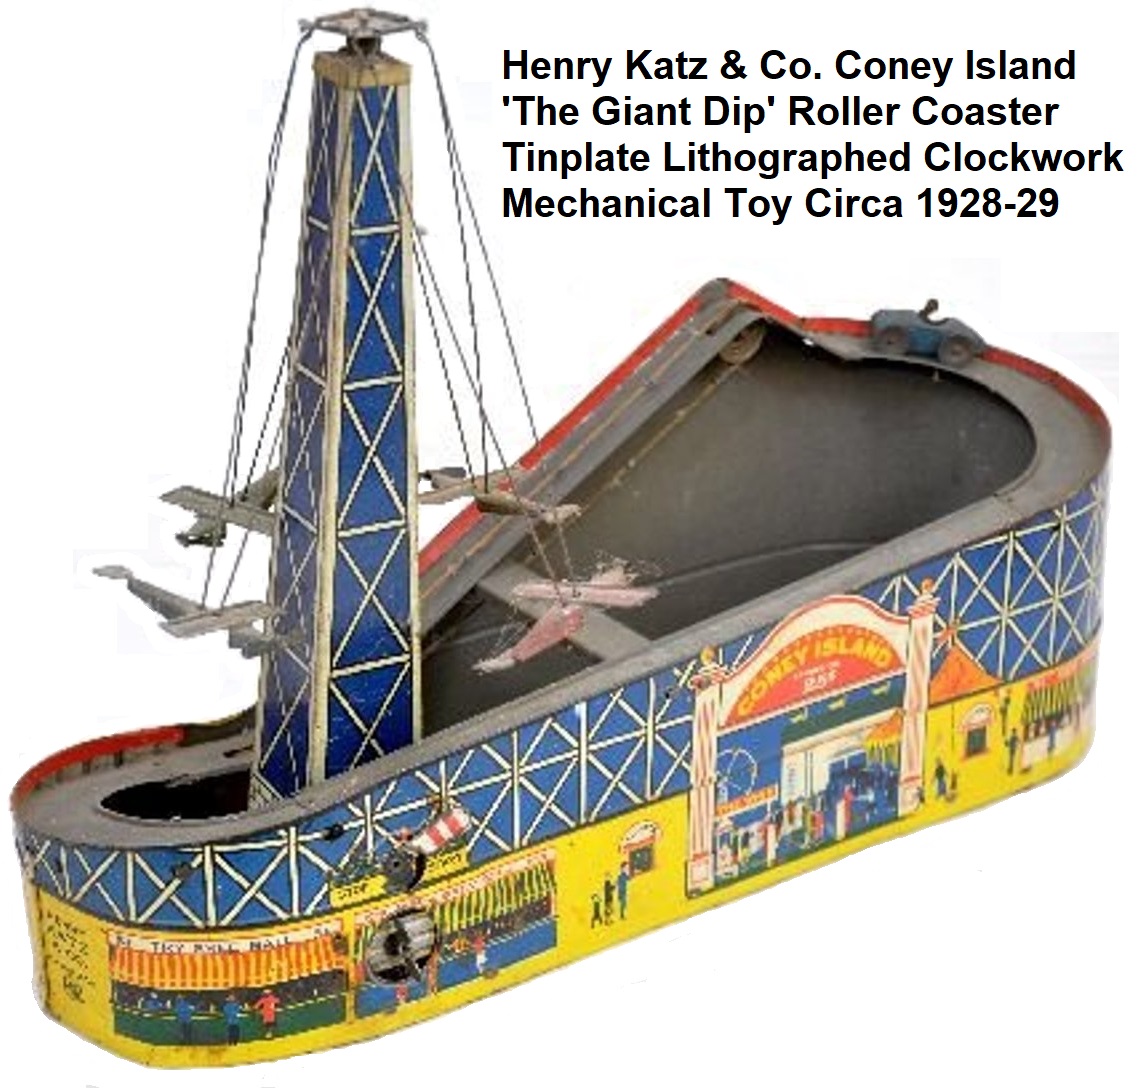 Henry Katz & Co. Tinplate Lithographed 'The Giant Dip' Coney Island Roller Coaster Toy circa 1928-29